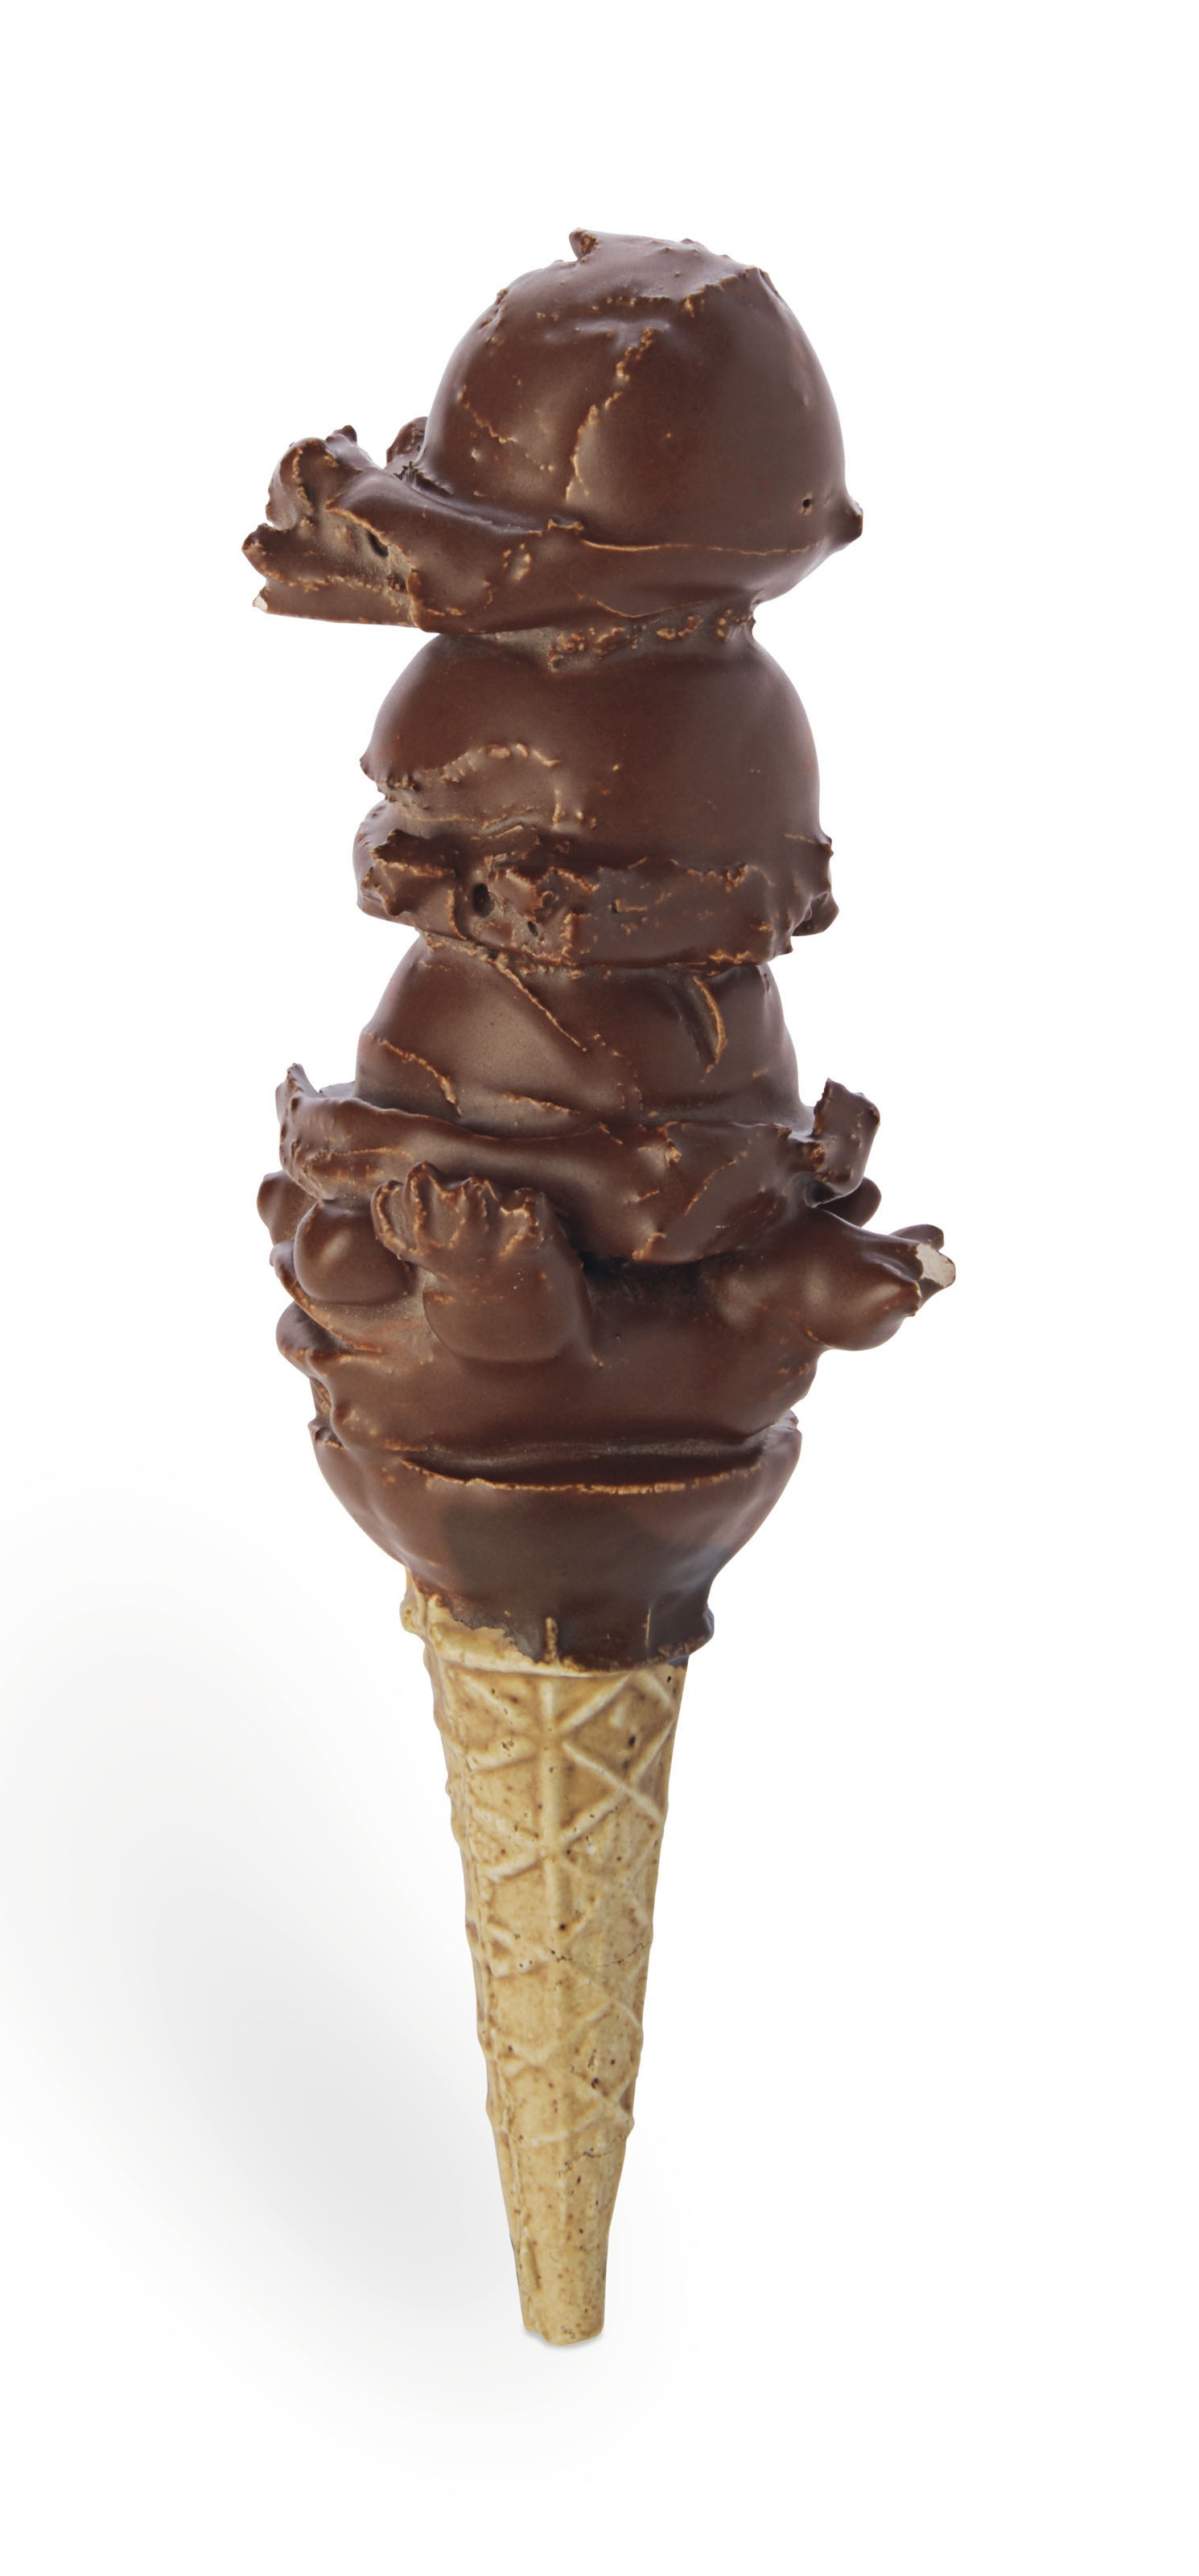 Solved A single-scoop ice cream cone is a composite body